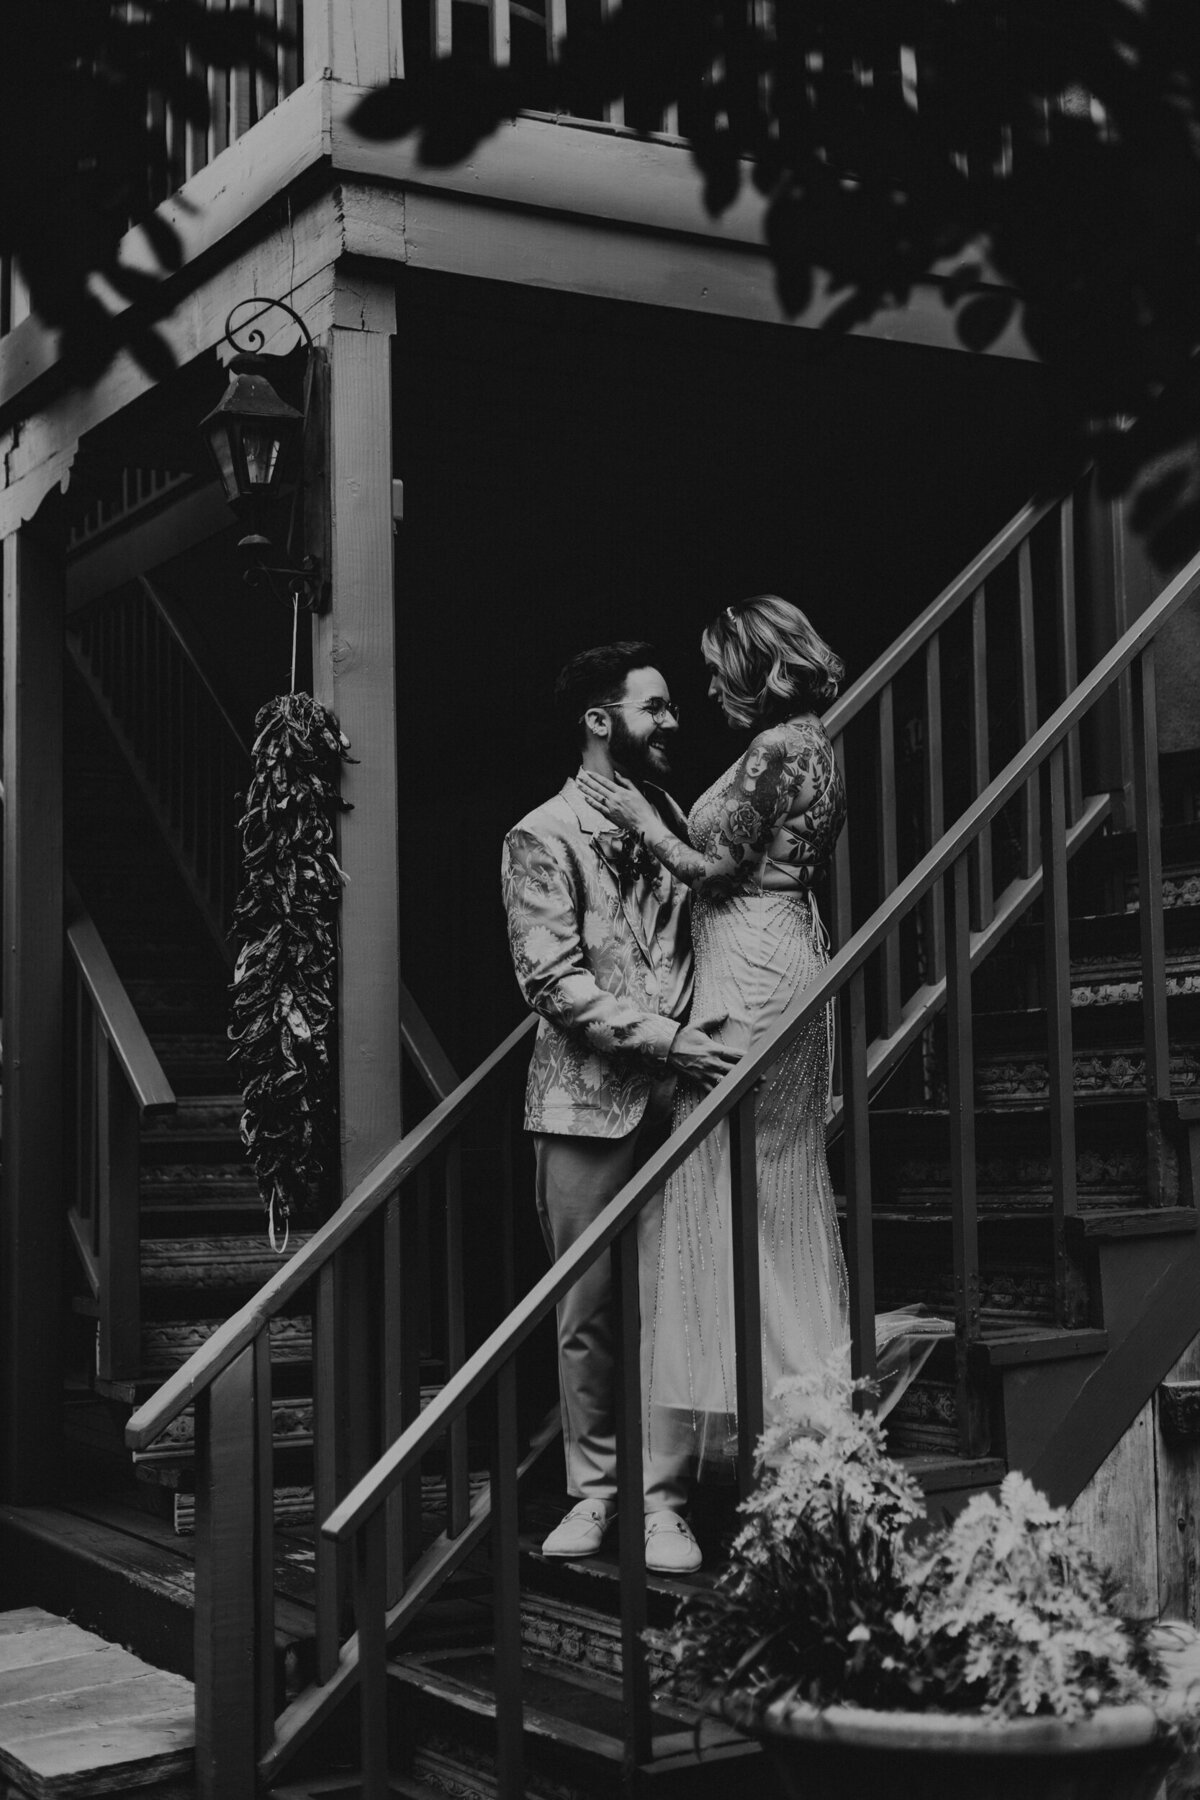 bride and groom standing on stairs together in Santa Fe